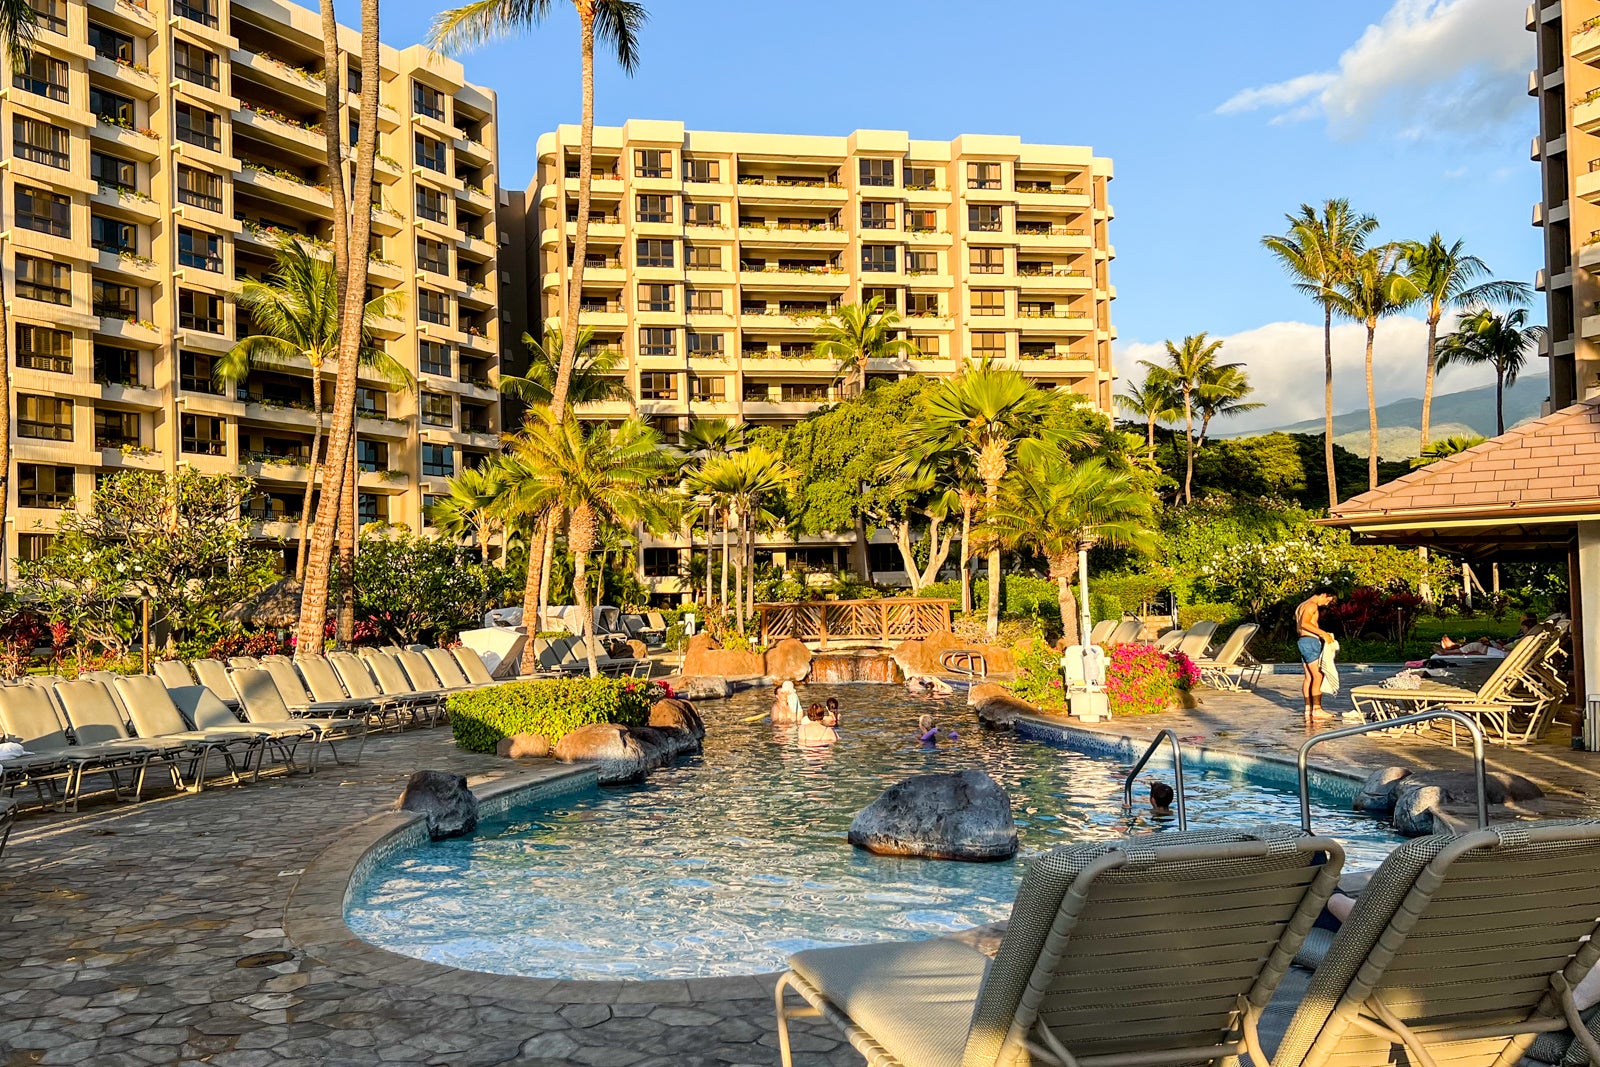 Maui magnificence: A overview of Kaanapali Alii, a Vacation spot by Hyatt Residence